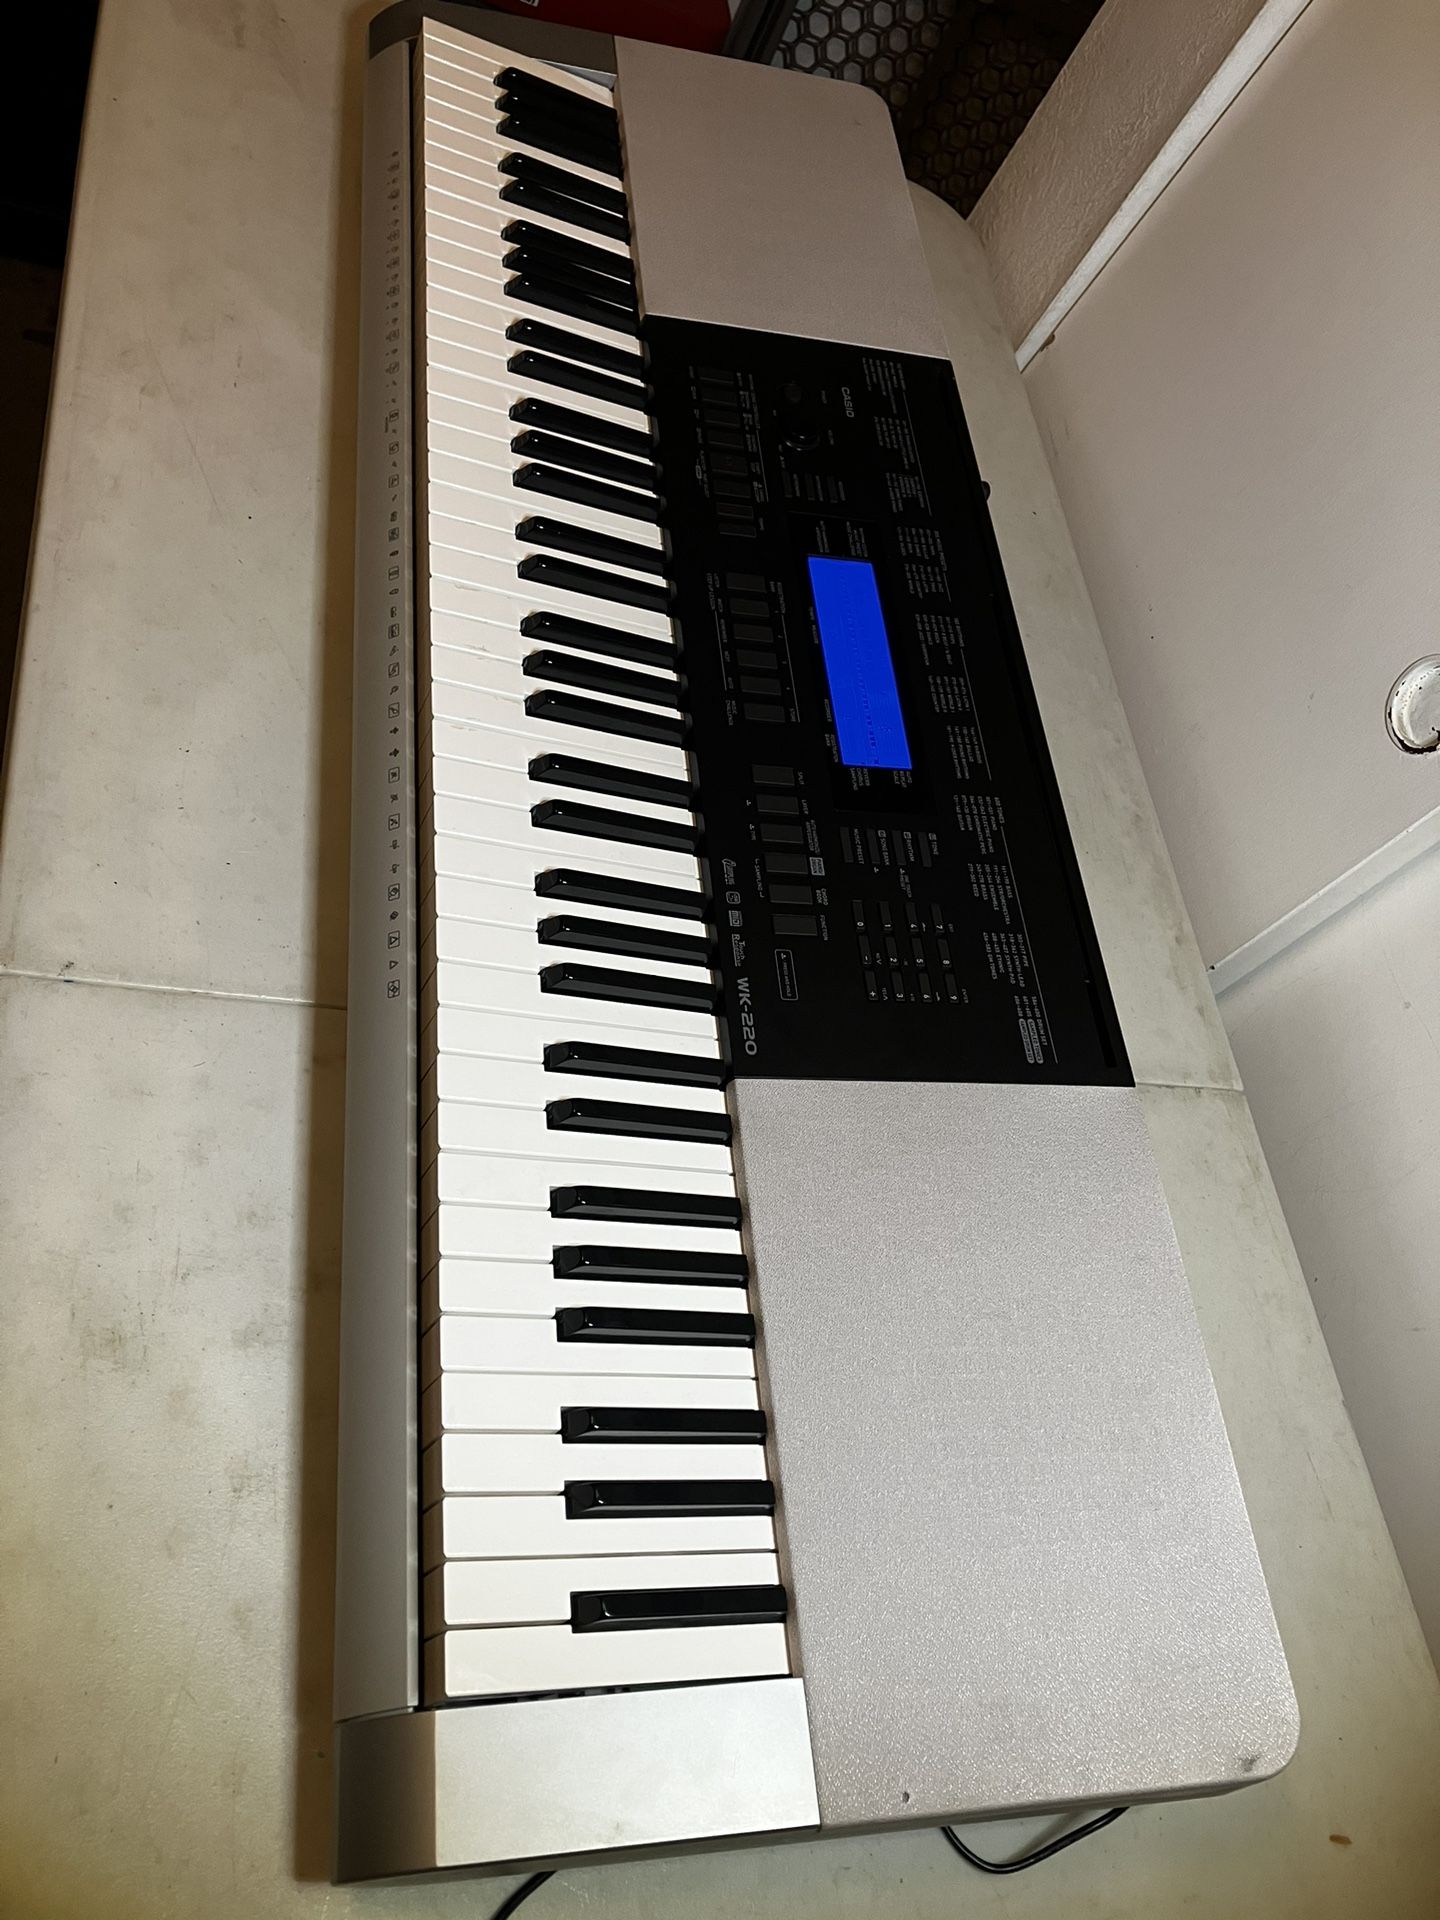 Casio WK 220 Electric Piano w/ power Supply & Stand Portable Electronic Keyboard   Good condition, as pictured, has power cord included but can run on